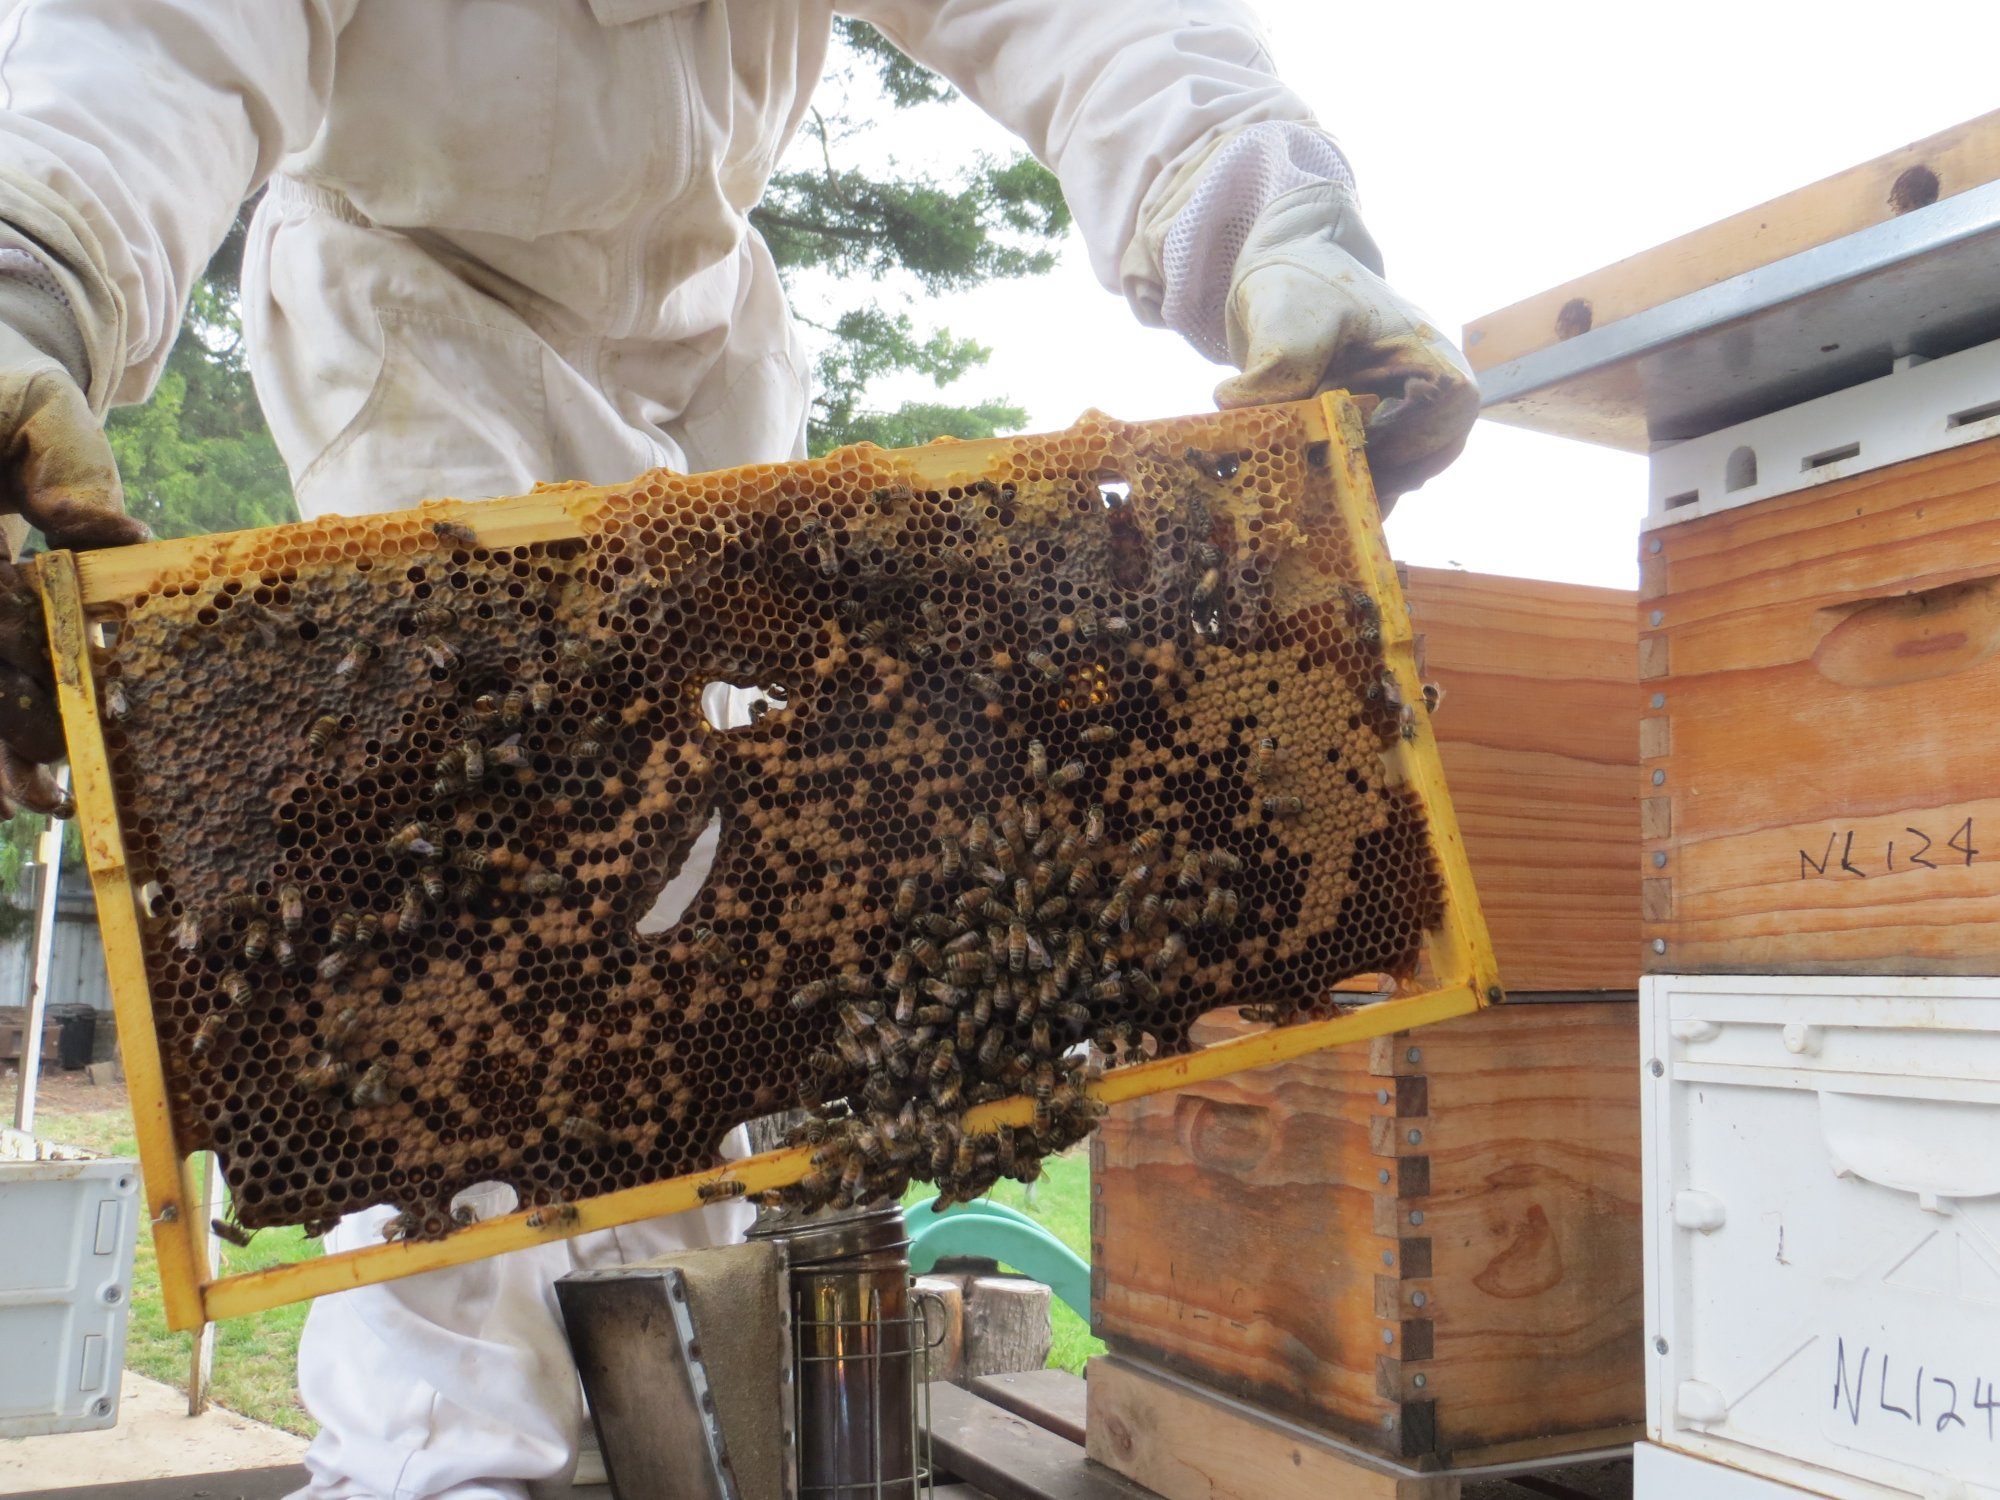 Captions: top, Sze Teen Lee holds a frame of bees and their brood.